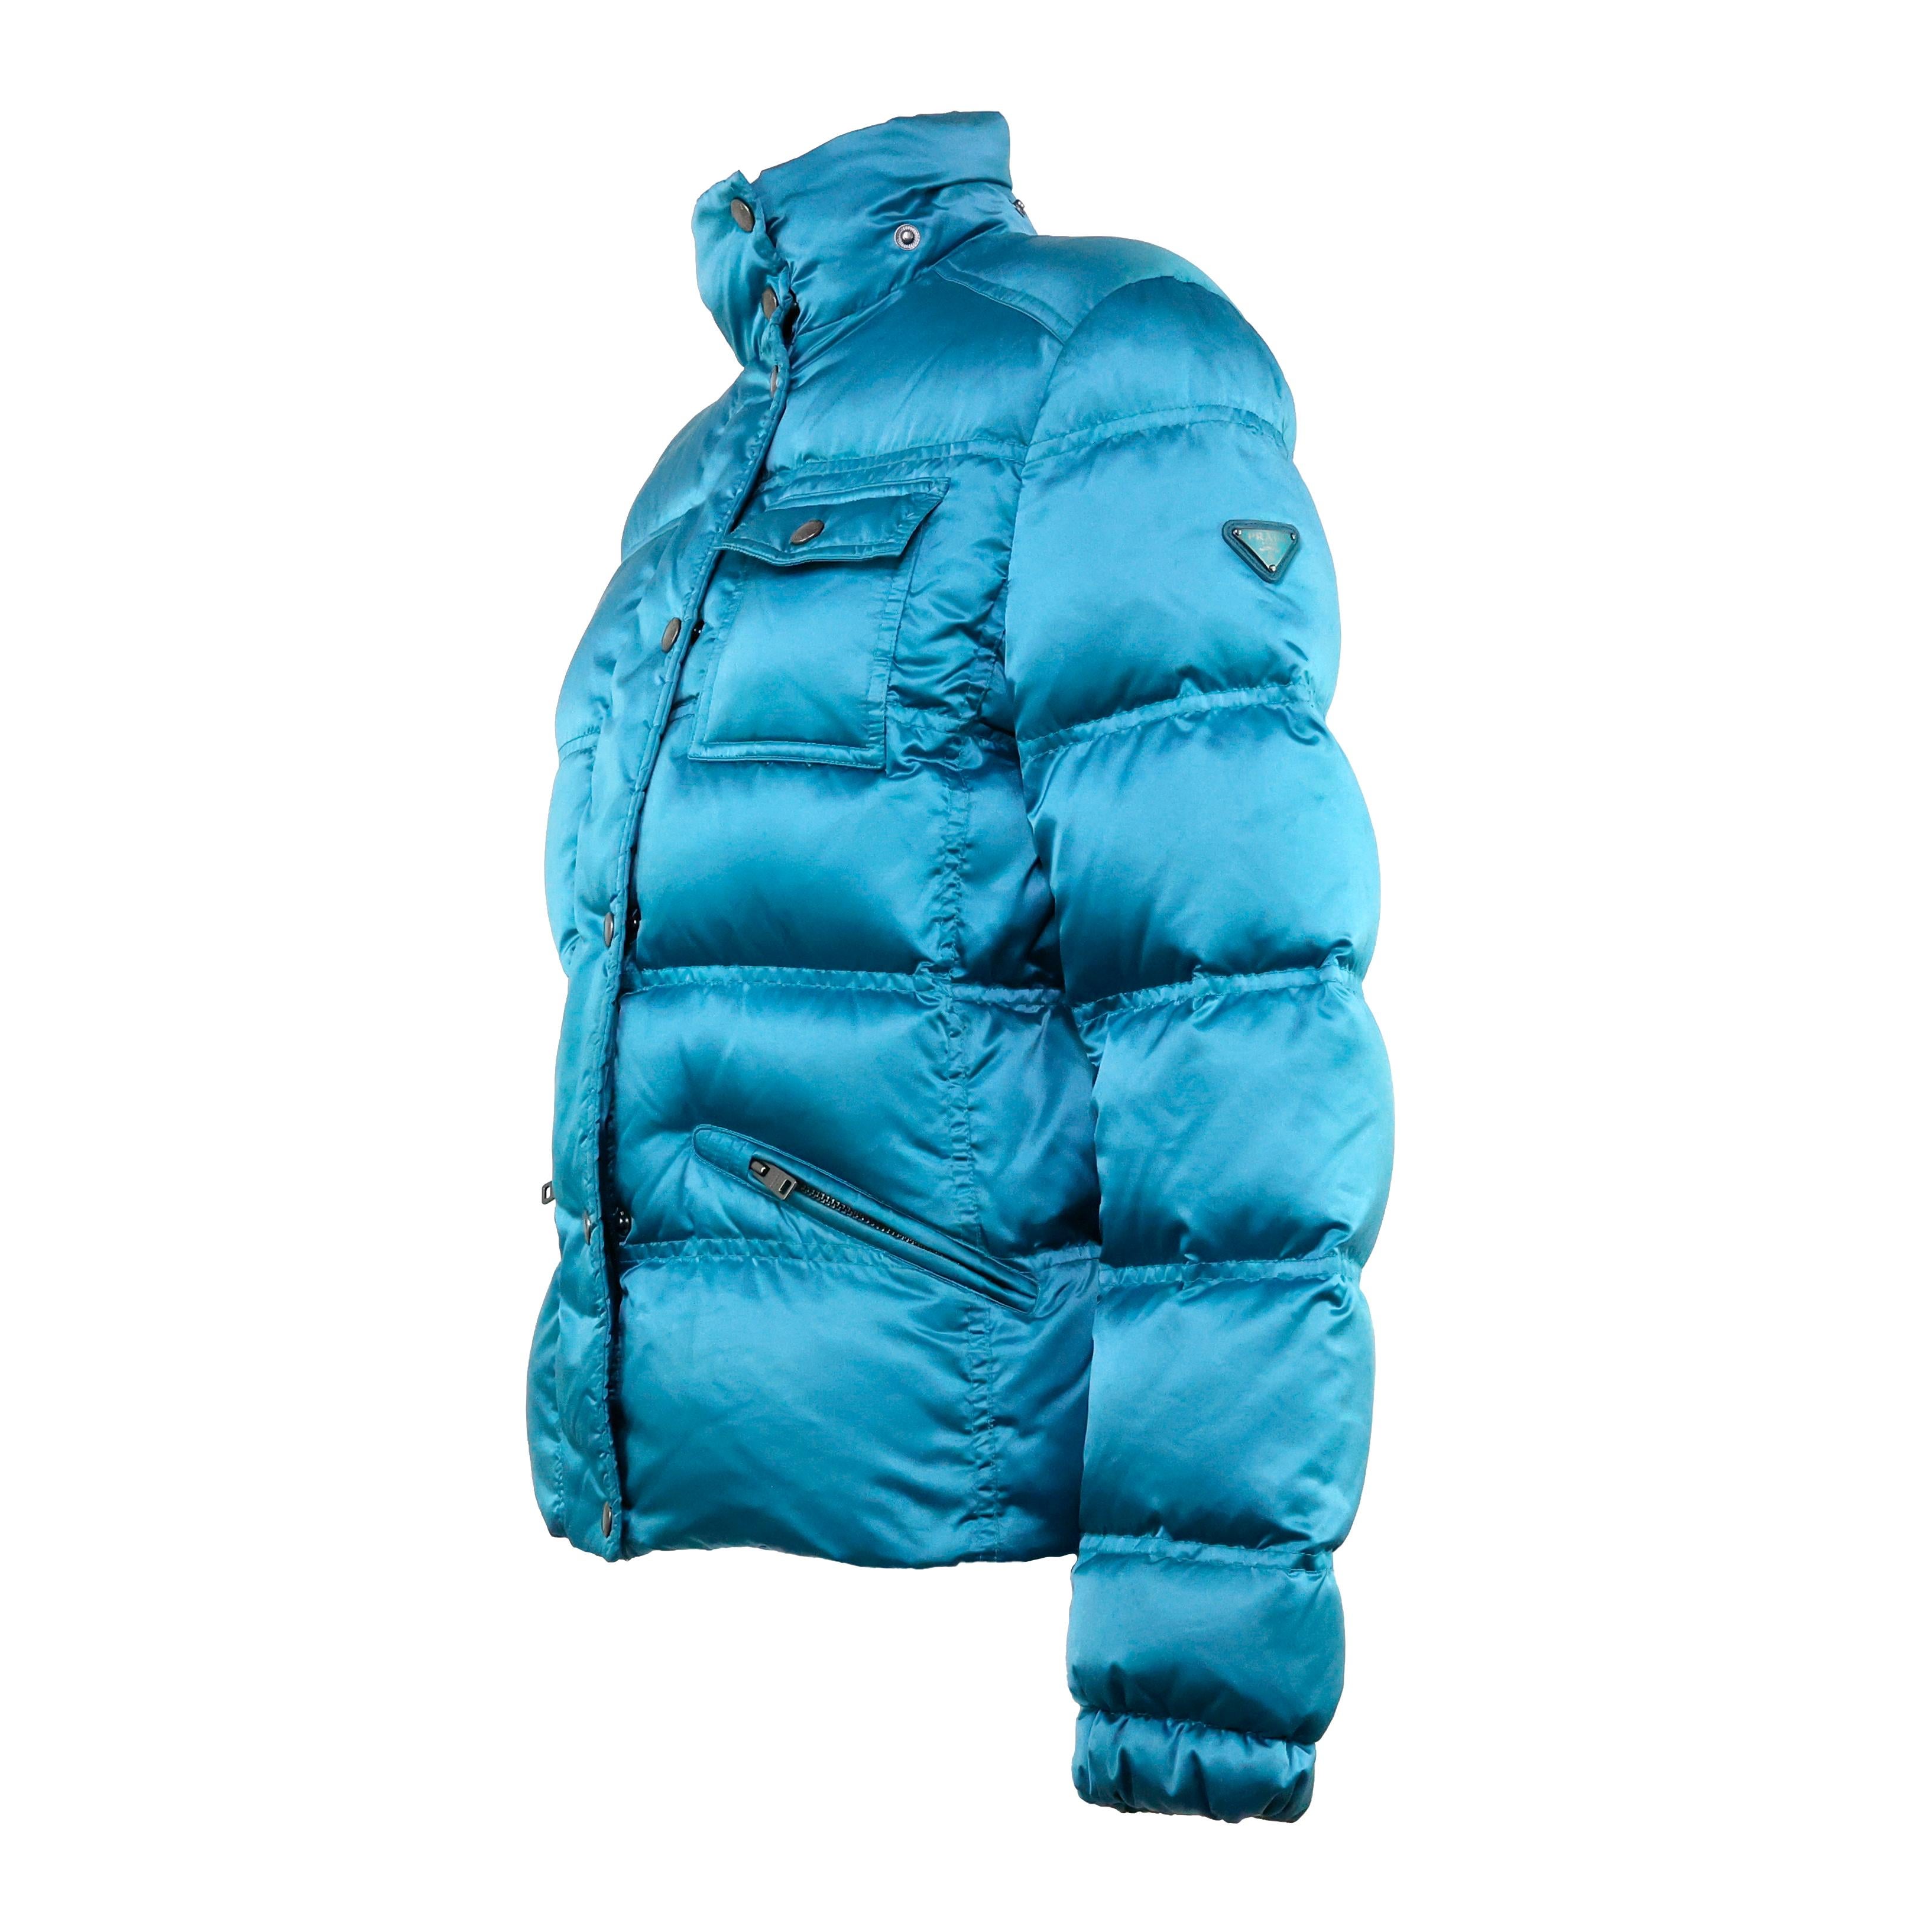 Women's Prada Triangle Logo Puffer Jacket in Turquoise Satin For Sale